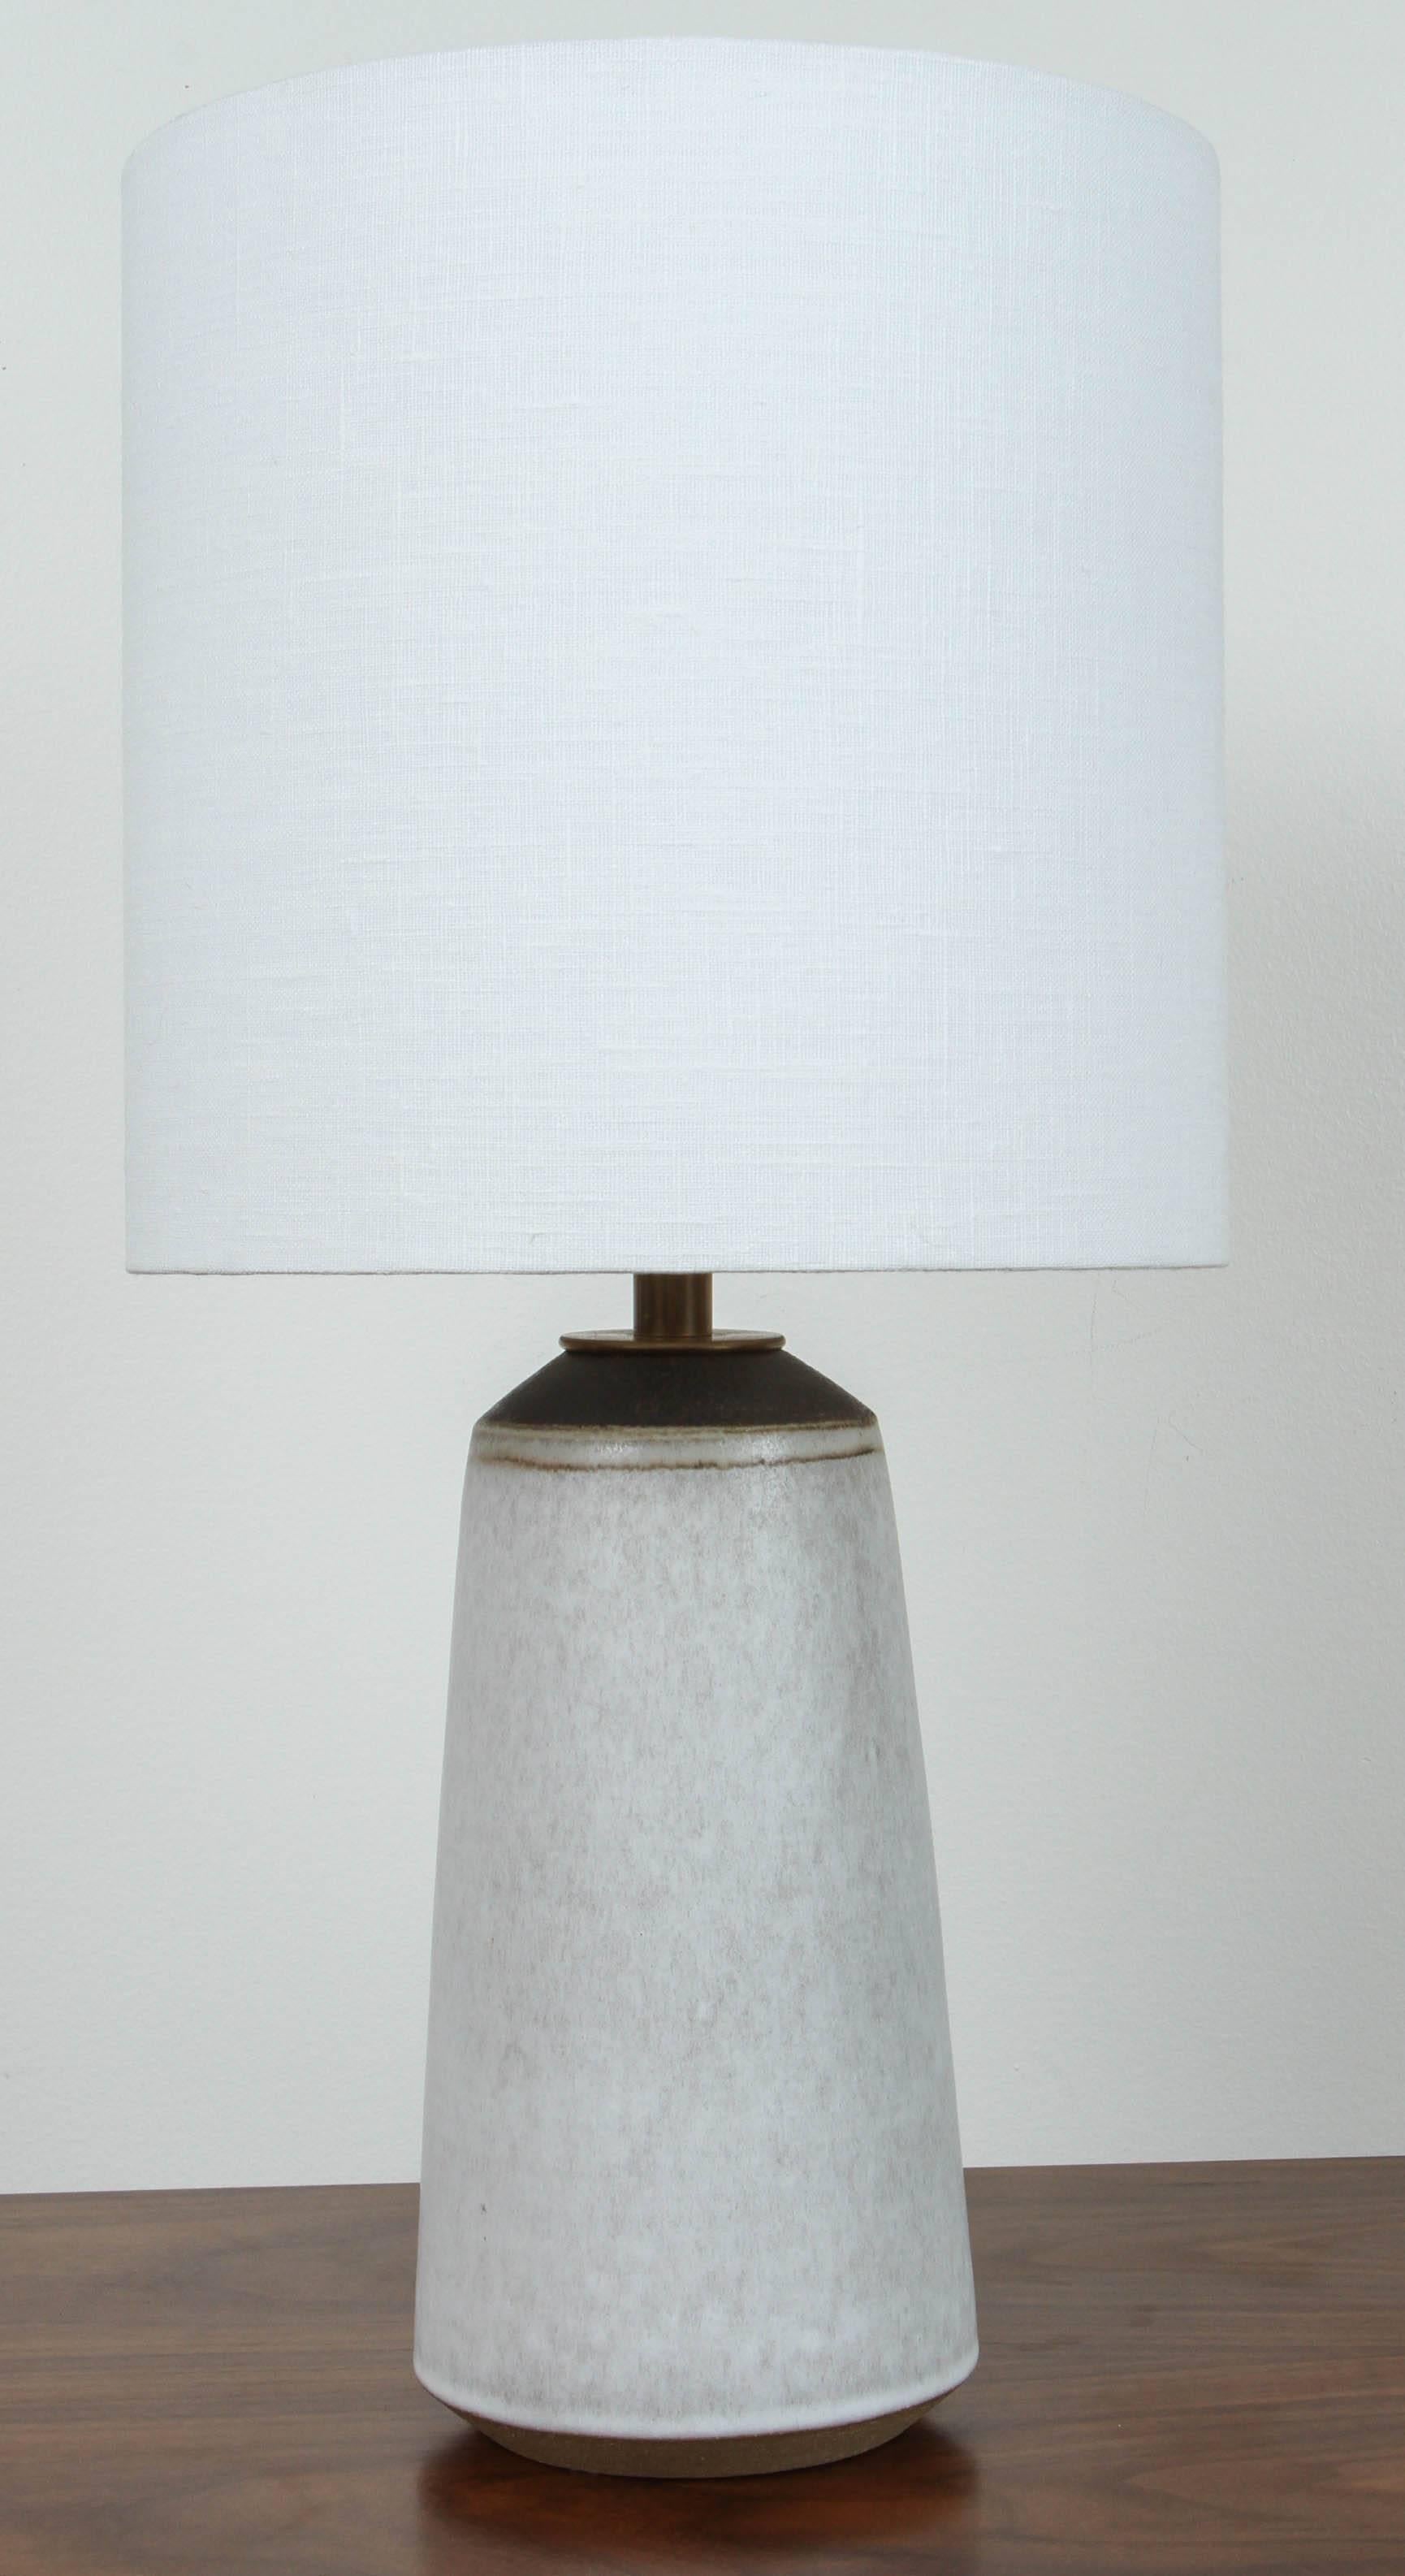 Pair of White Birch Ceramic Table Lamp by Victoria Morris
